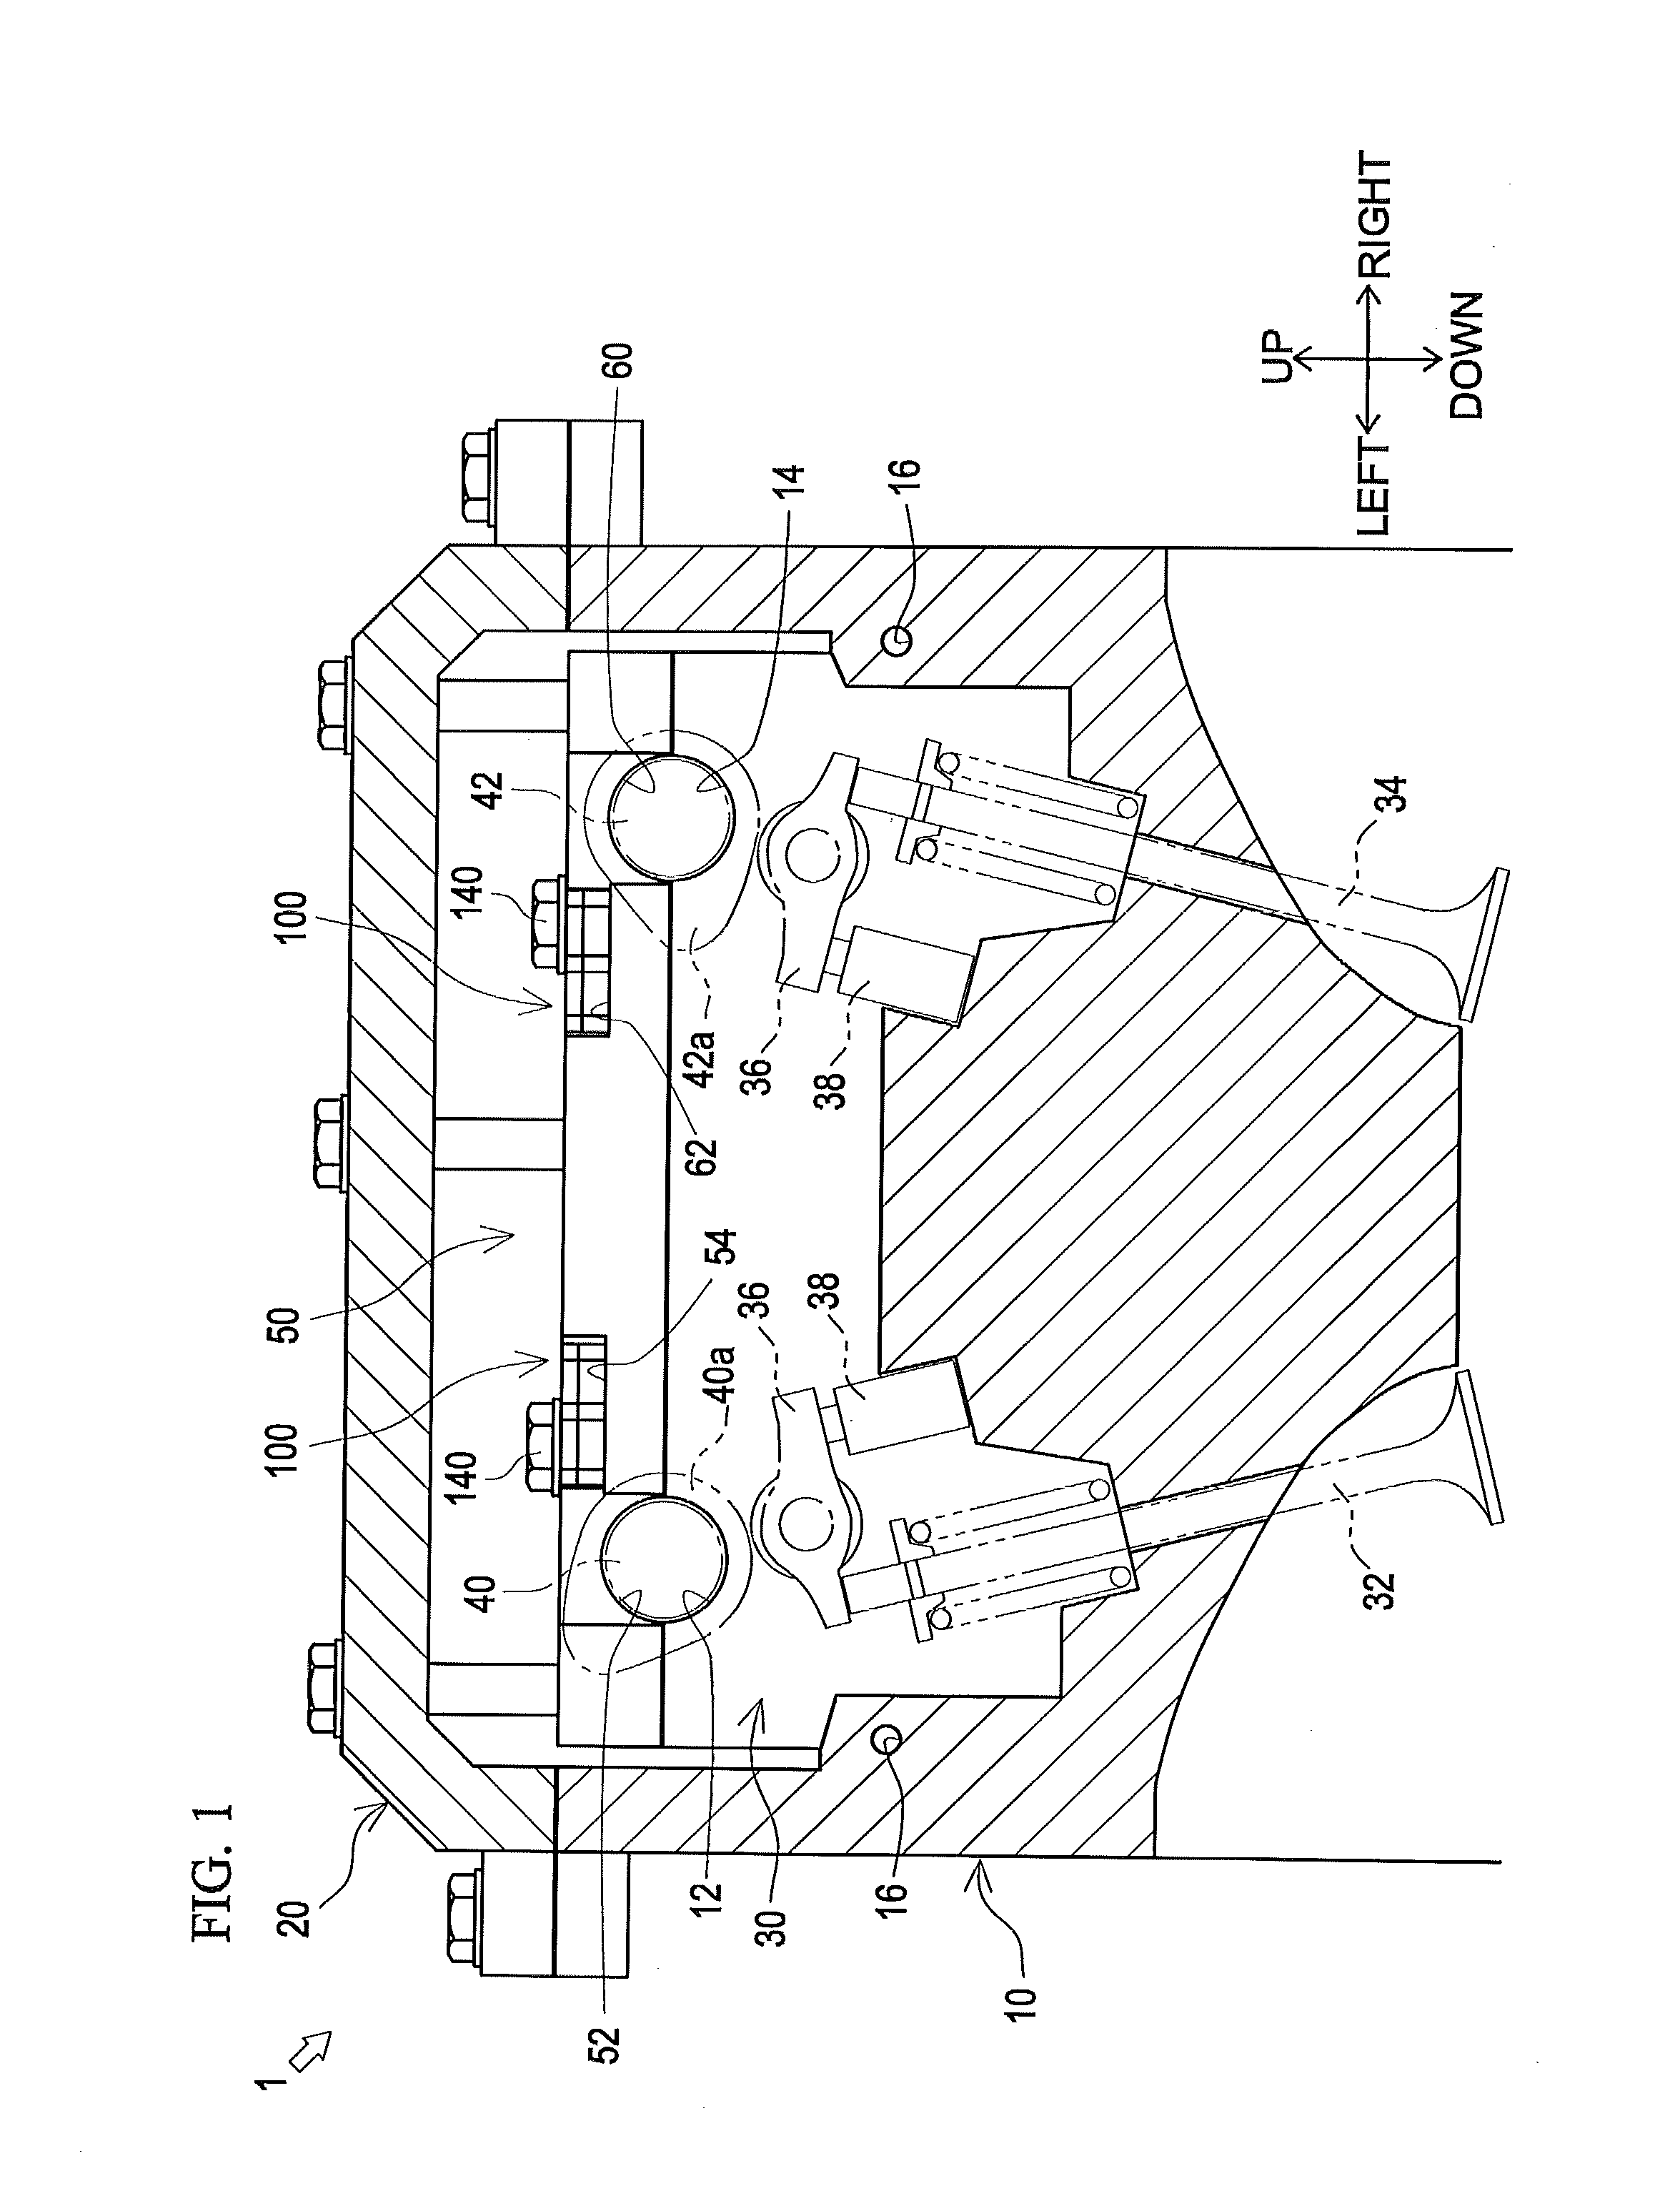 Lubricant feed mechanism for engine